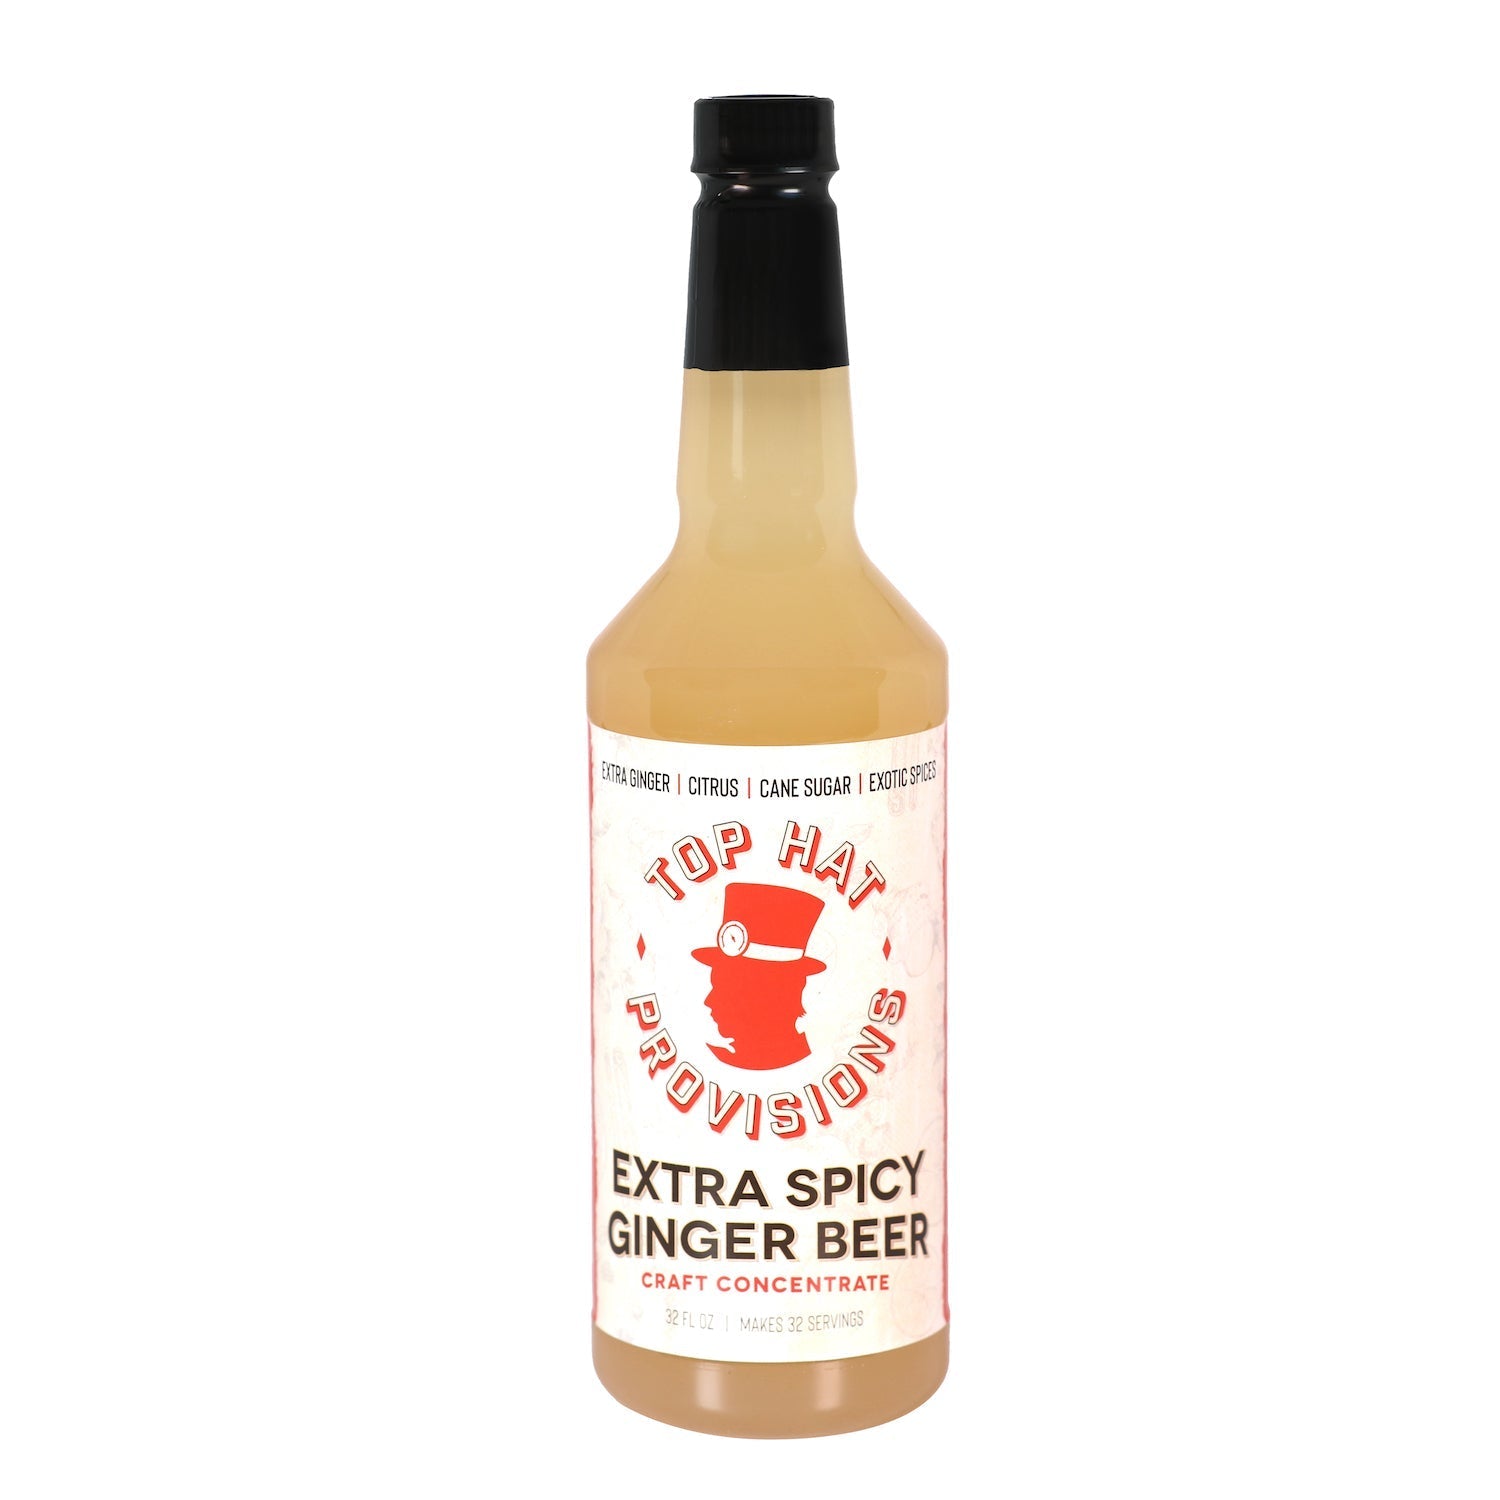 Top Hat Extra Spicy Ginger Beer Syrup & Moscow Mule Batching Mix - 12x32oz case - Groove Rabbit